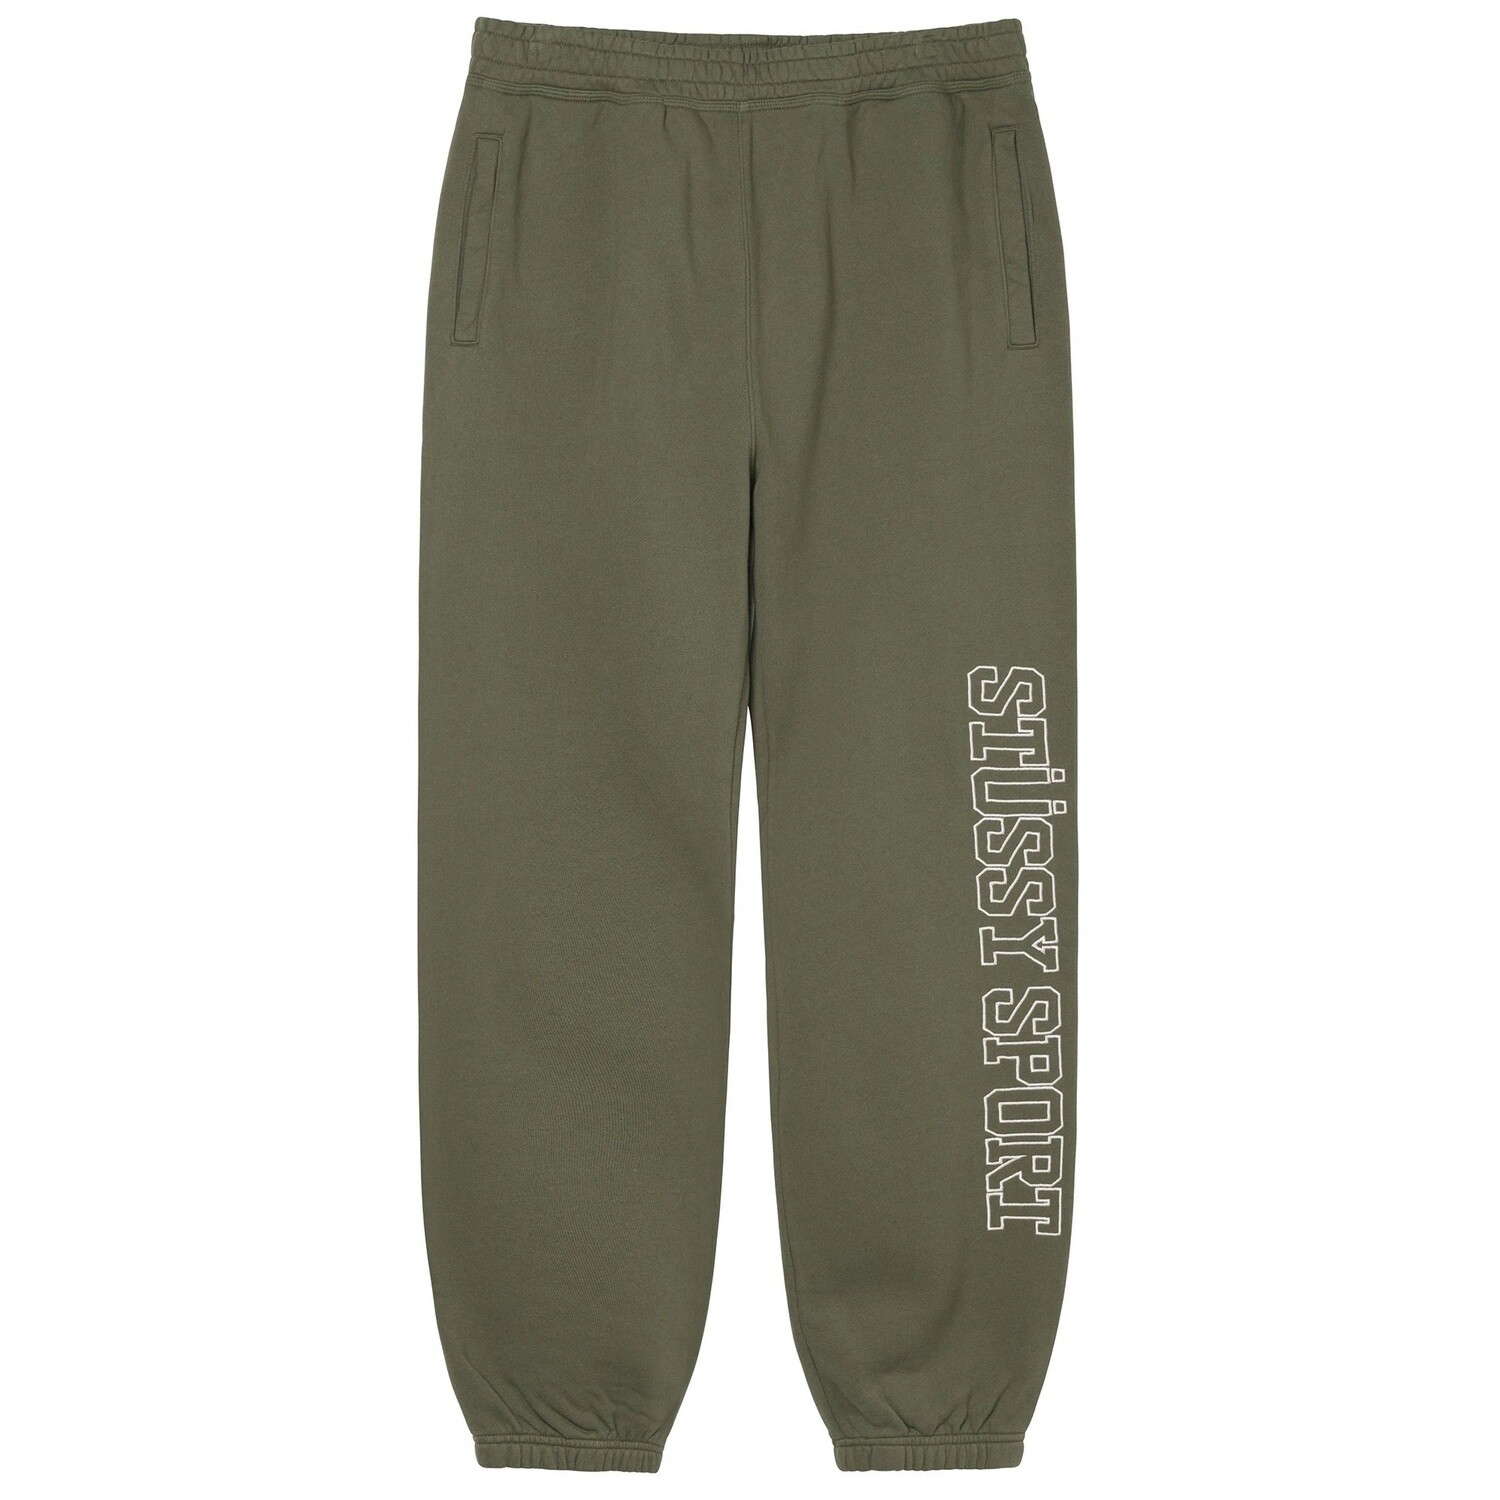 Stussy Stussy Sport Embroidered Pant